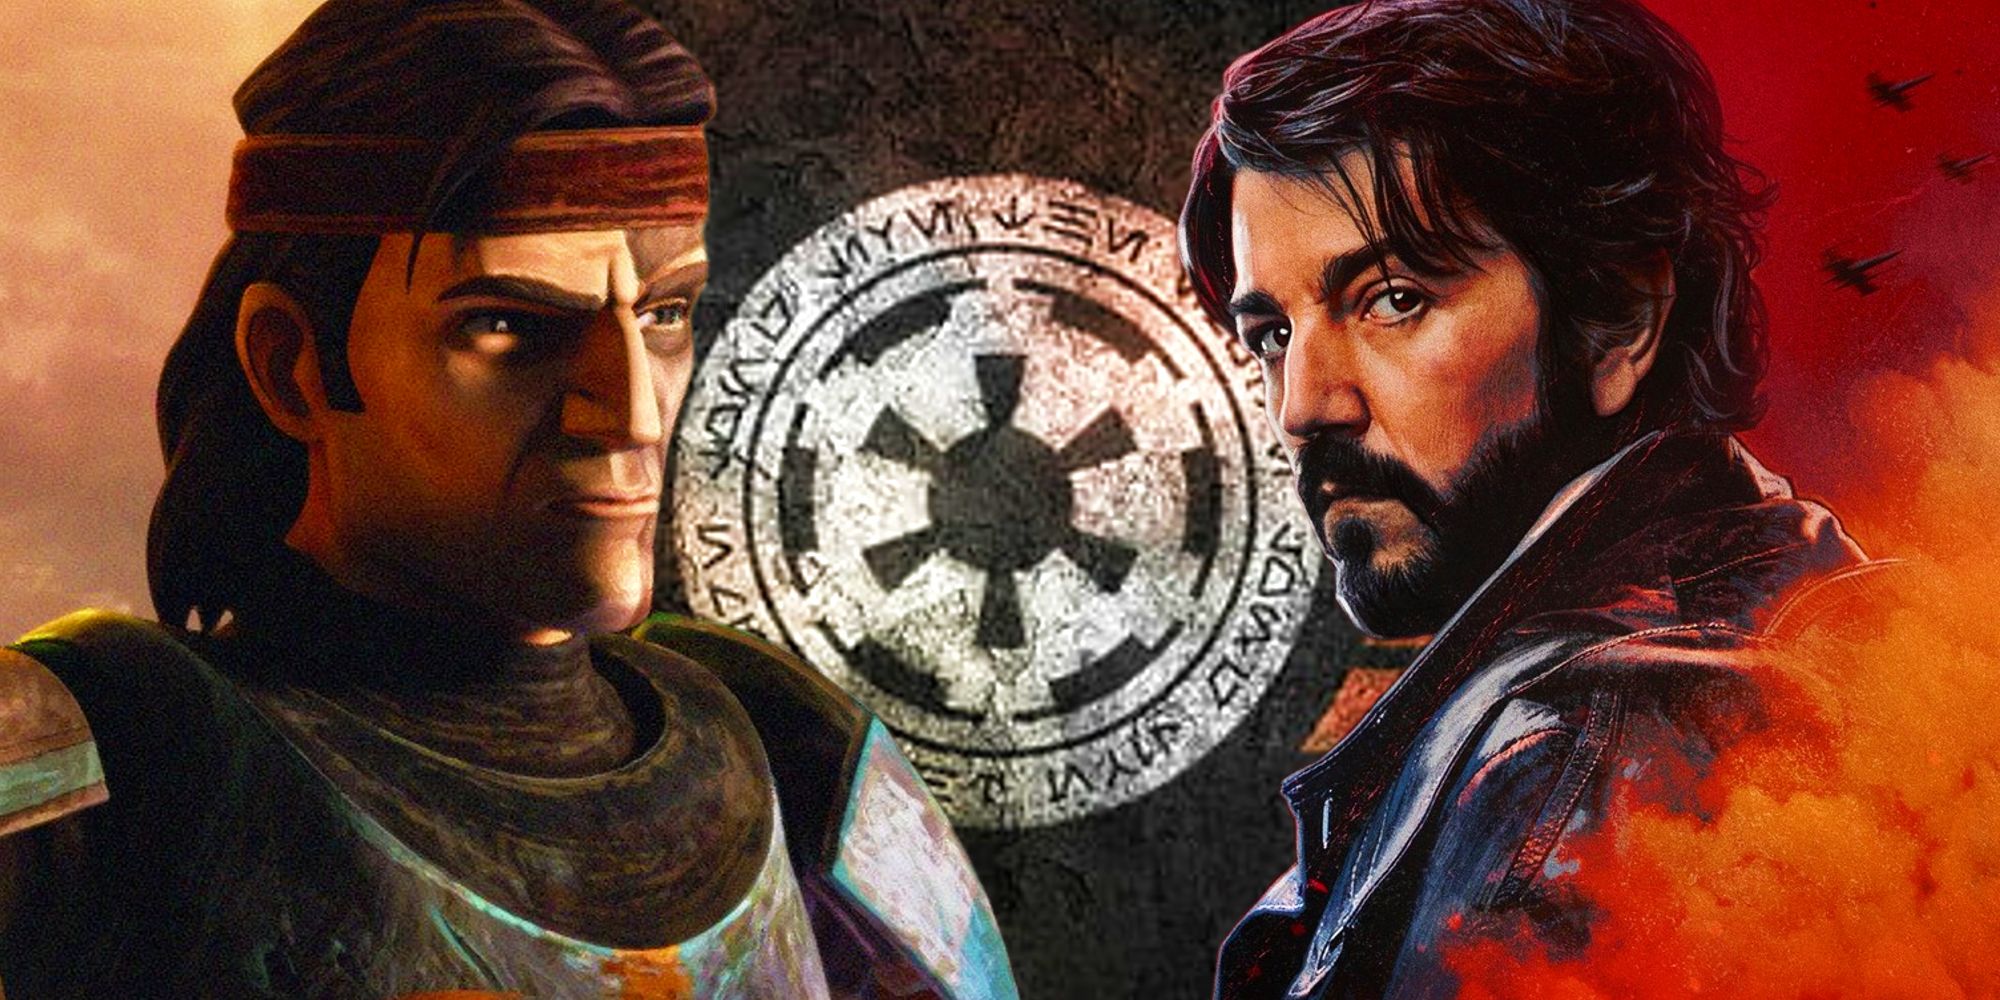 Cassian Andor in the poster for Andor and Hunter in the poster for The Bad Batch either side of the Imperial Logo in Star Wars